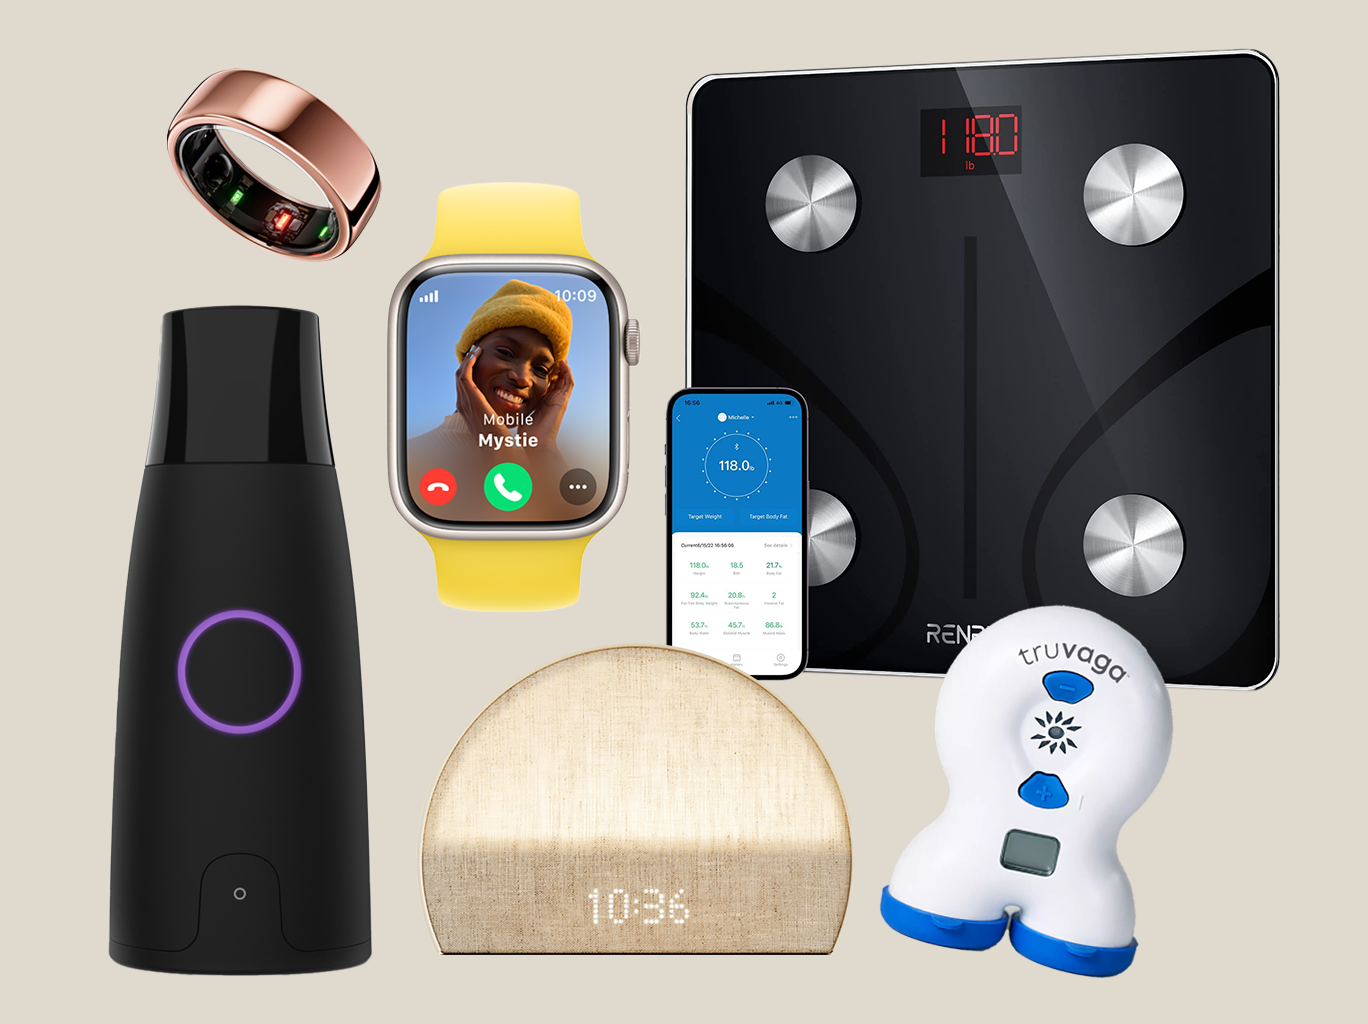 wellness devices, entrepreneurs, busy professionals, technology, health tracking, productivity, work-life balance, smart scales, Apple Watch, alarm clock with light, wearable technology, sleep tracking, energy optimization, metabolic rate analysis, stress reduction, mental clarity.